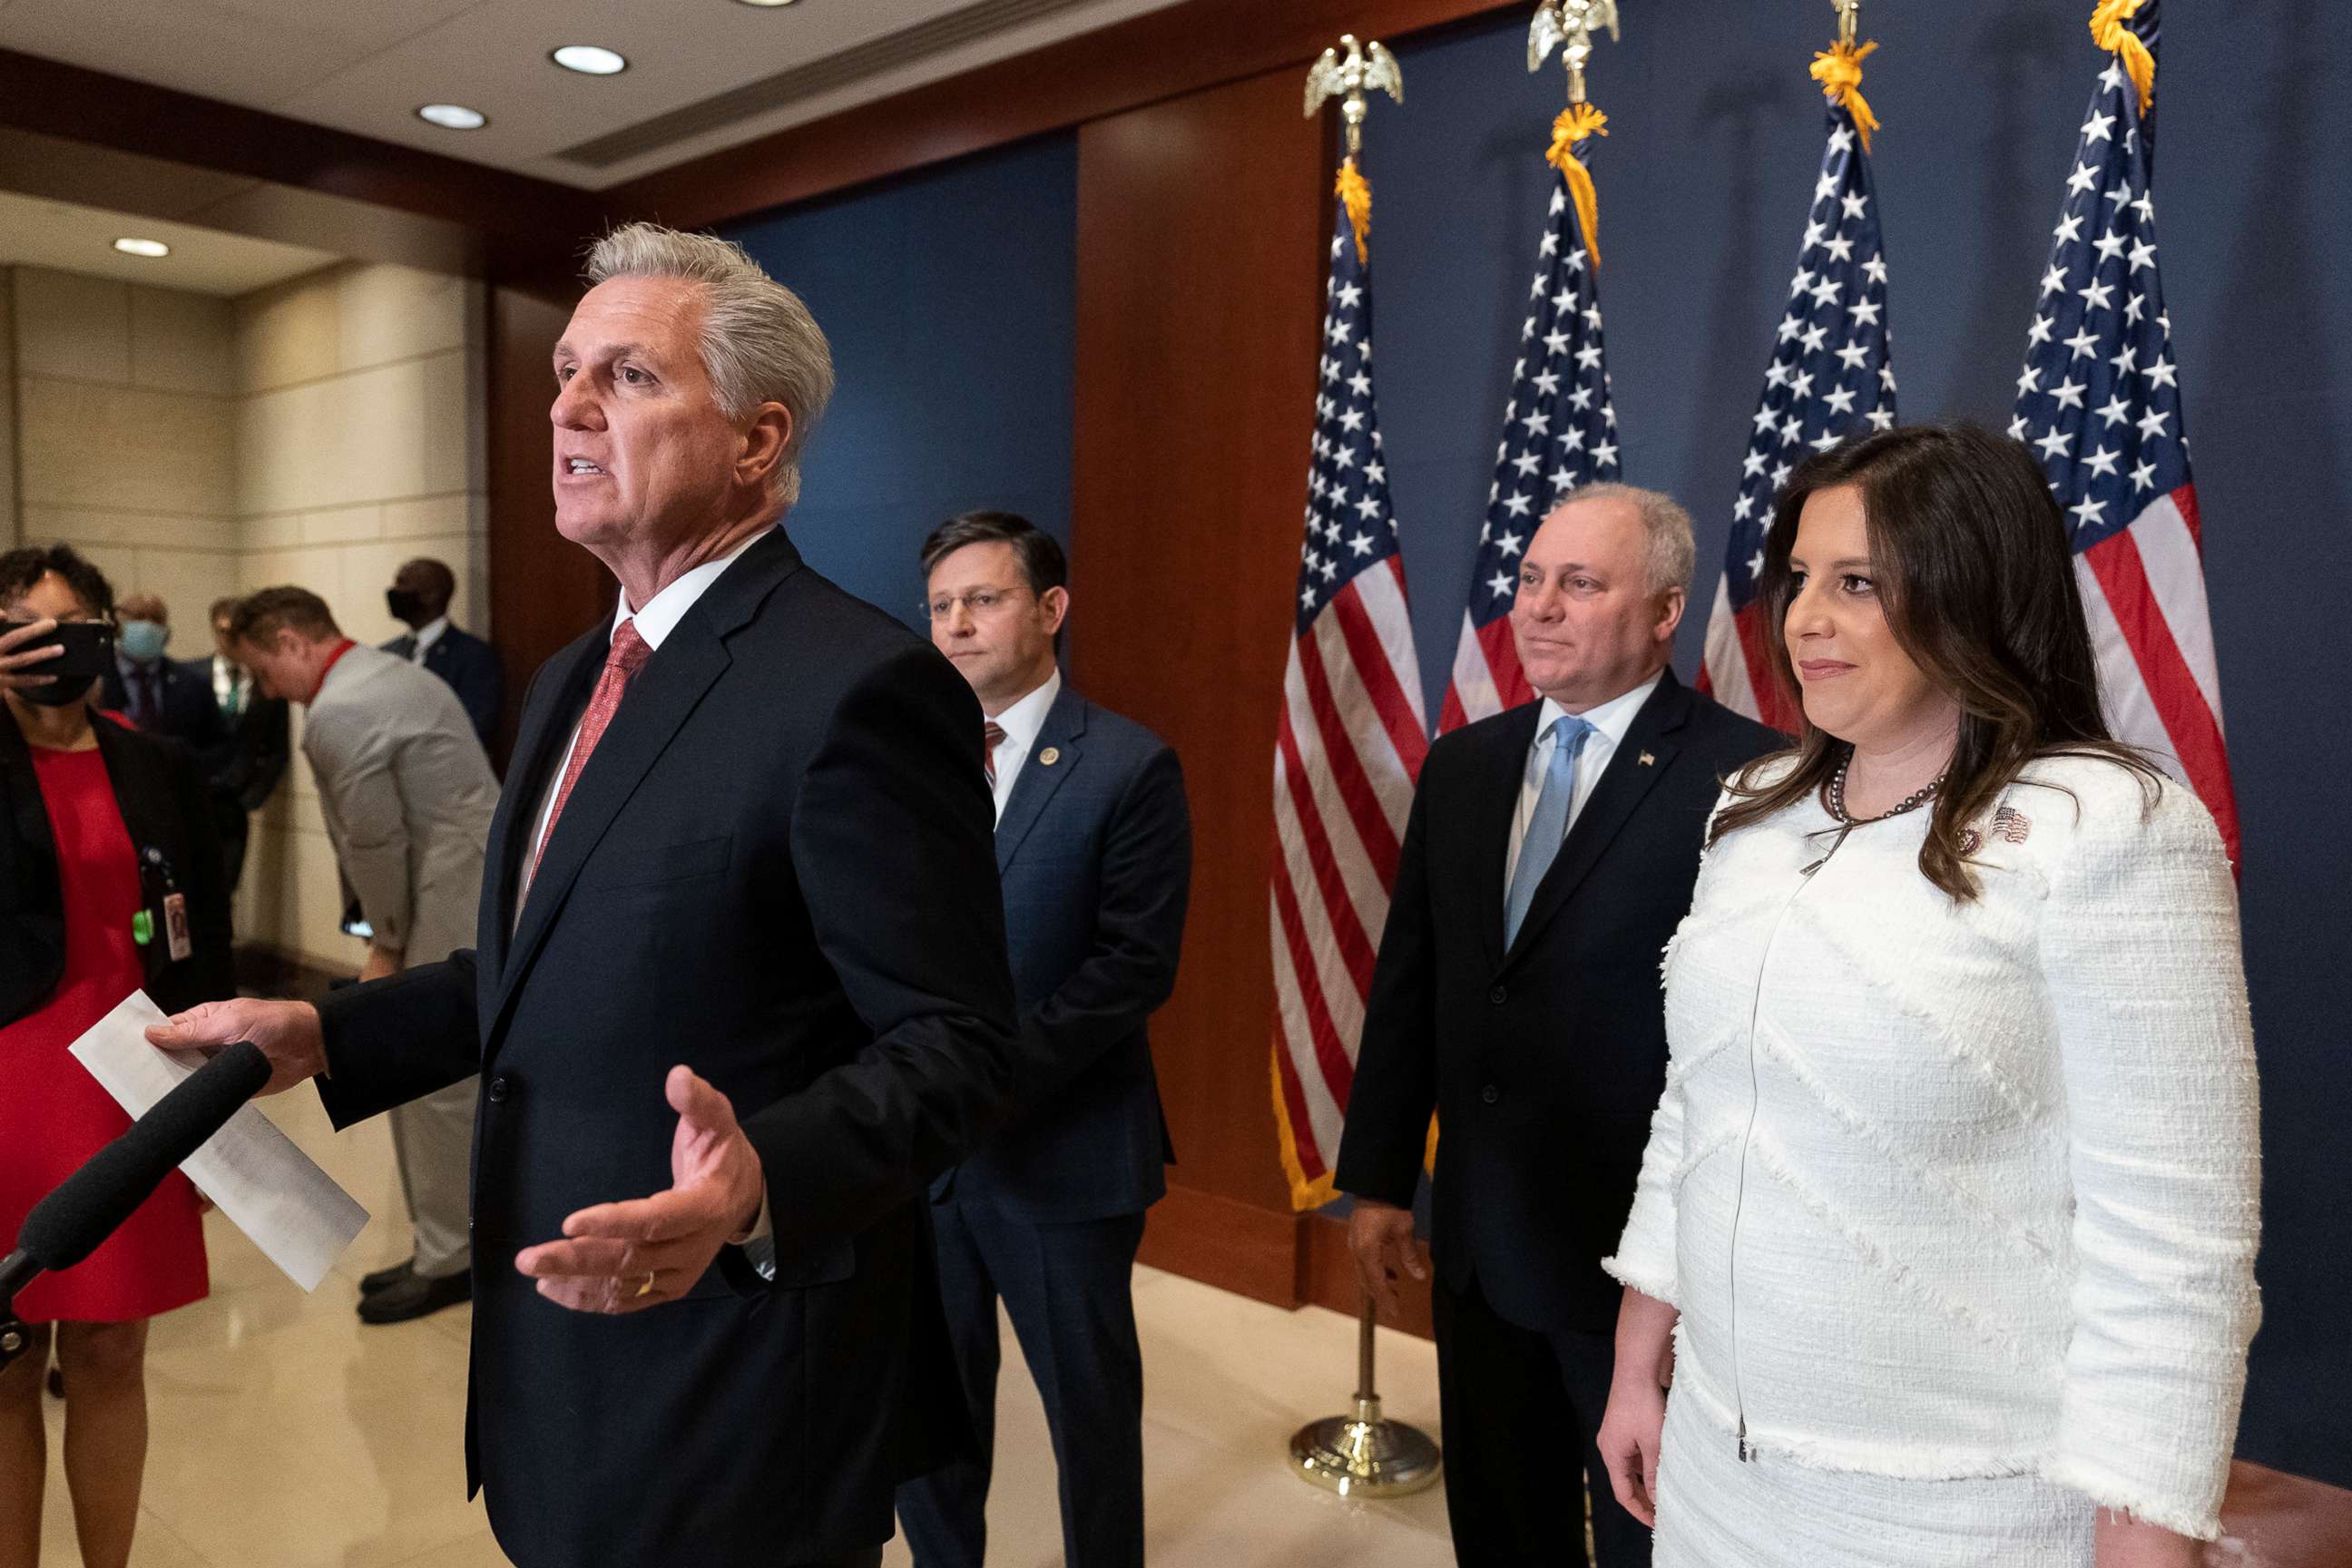 PHOTO: House Minority Leader Kevin McCarthy speaks to reporters, along with Rep. Gary Palmer, House Minority Whip Steve Scalise and newly-elected House Republican Conference Chair Rep. Elise Stefanik, May 14, 2021, on Capitol Hill.